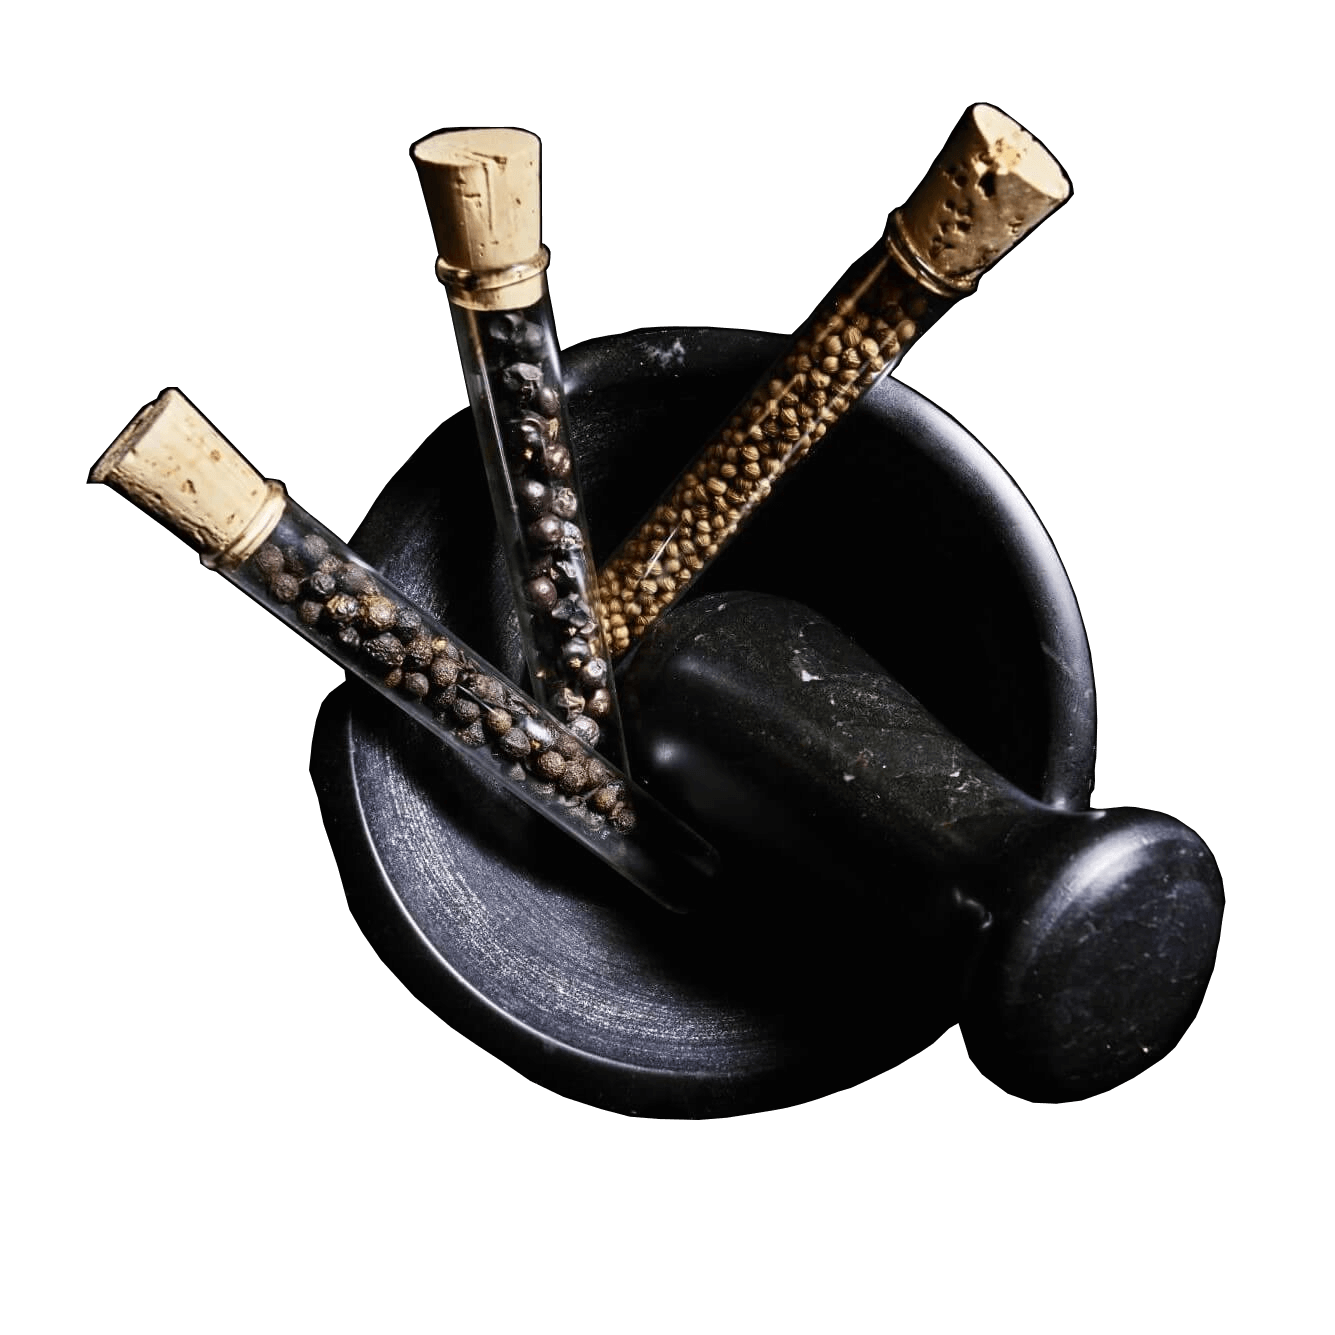 Mortar and pestle with flavours